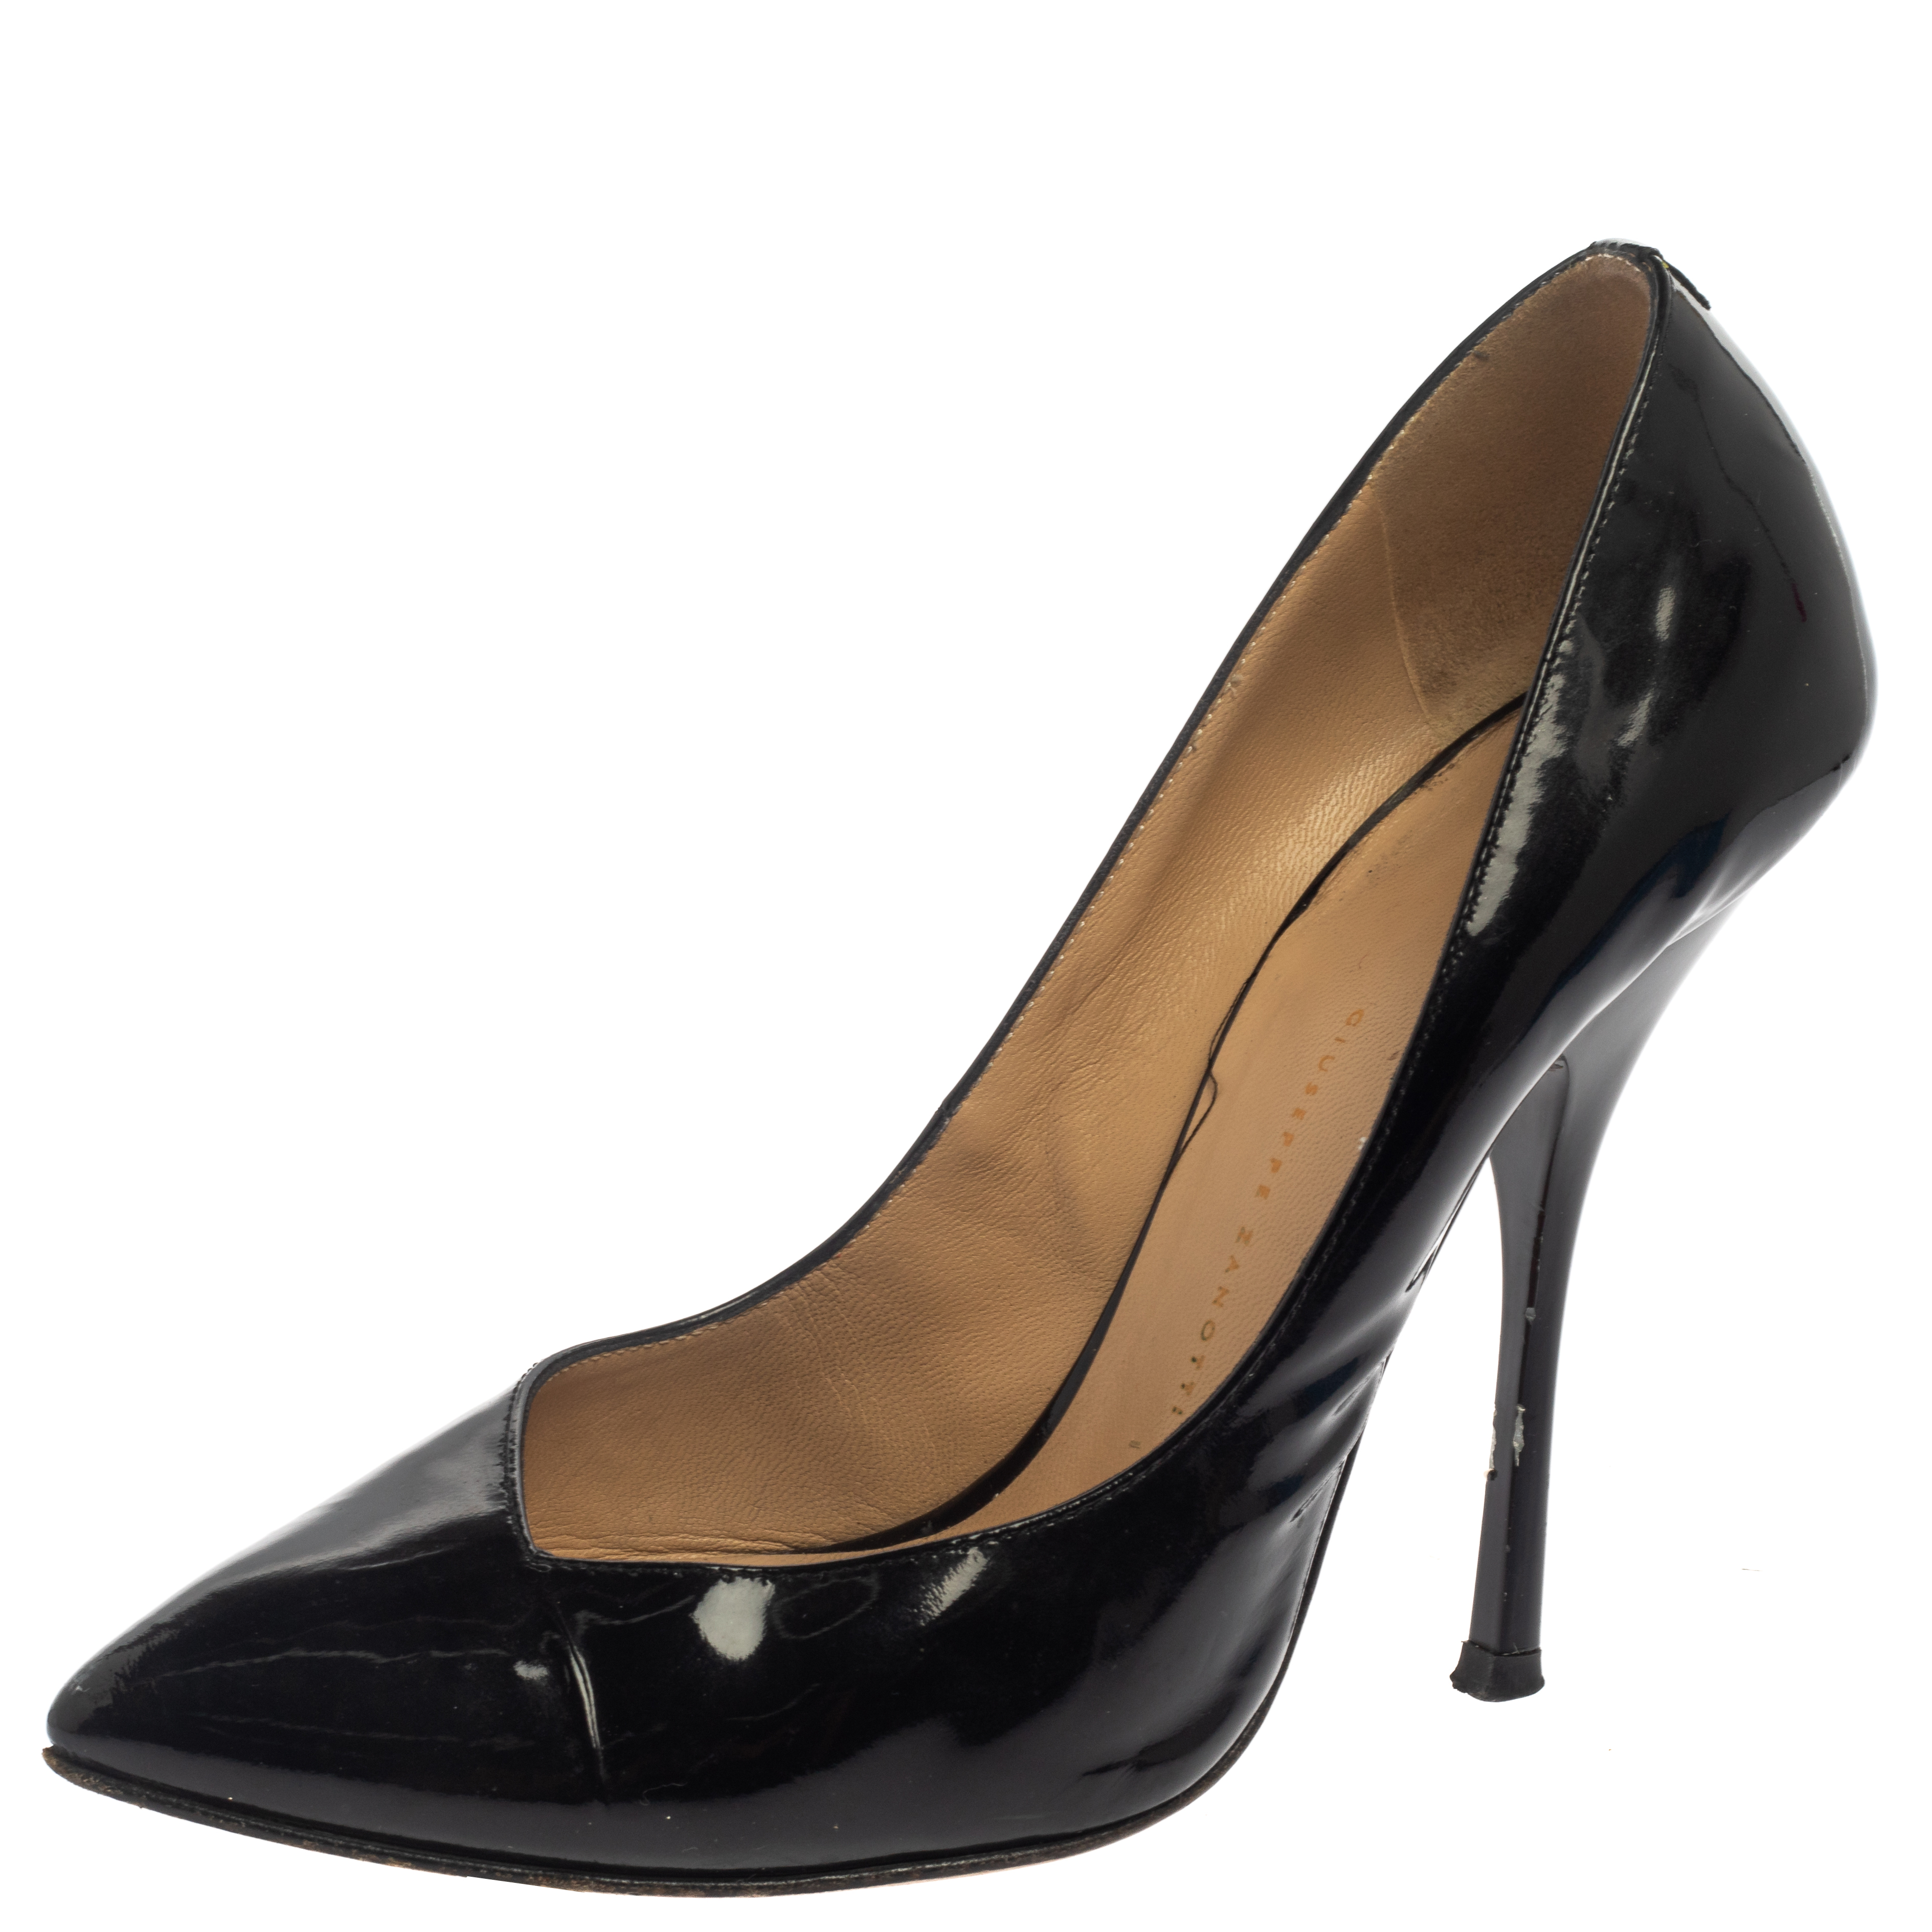 Perfect for everyday wear are these Giuseppe Zanotti pumps that exude a timeless appeal. Made from black patent leather these elegant pumps feature pointed toes low cut vamps and 11.5 cm heels. Style them both formal and casual attires for a stylish look.